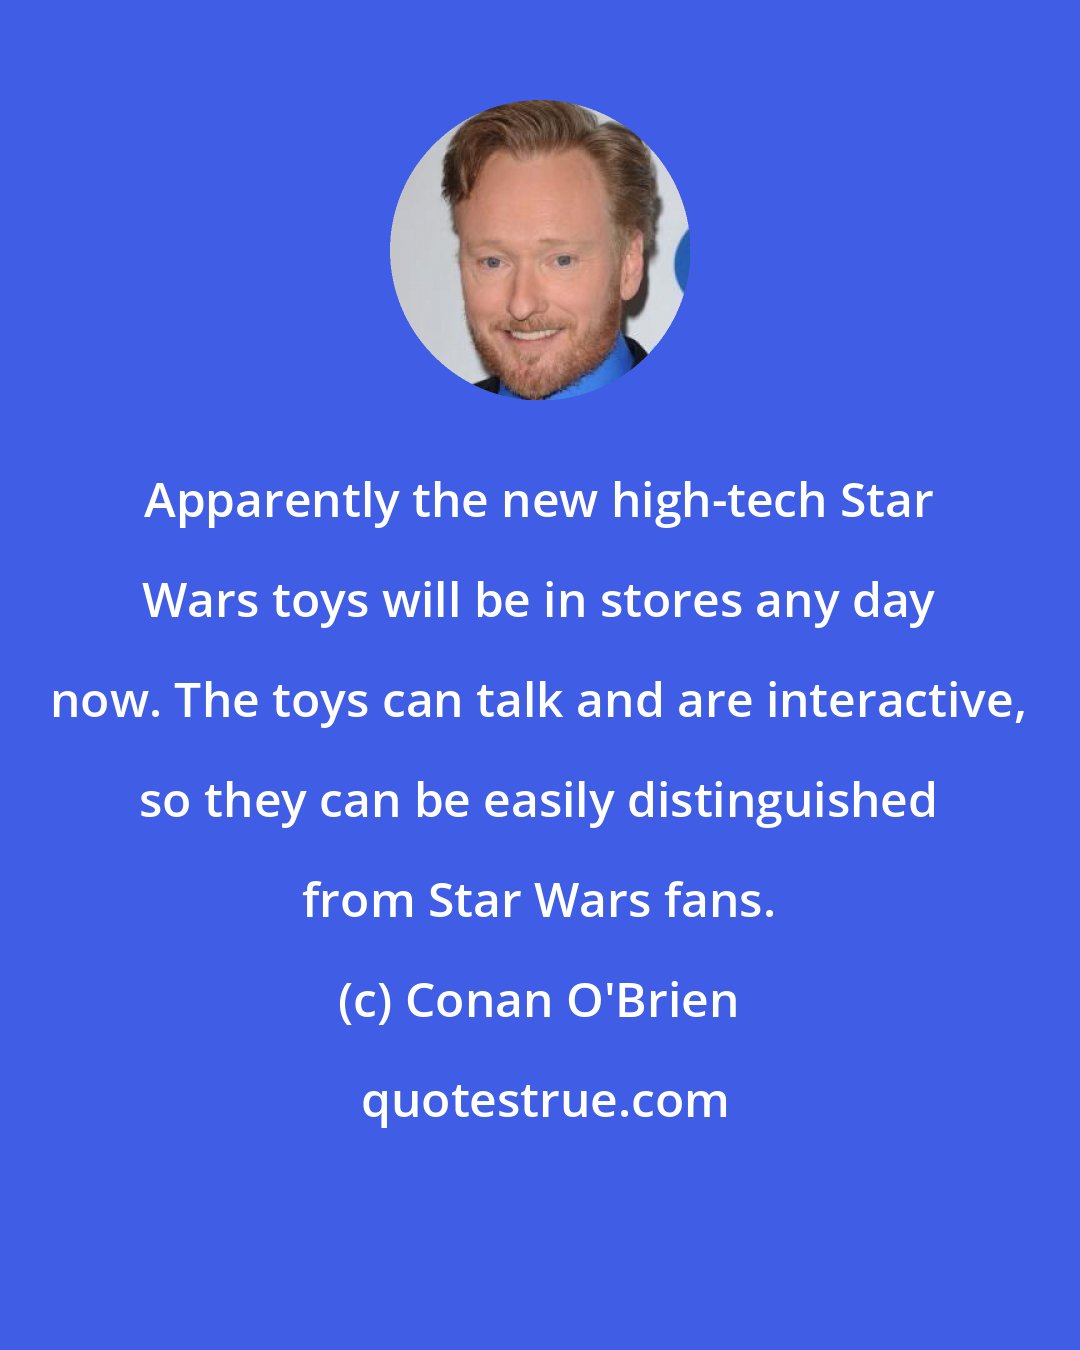 Conan O'Brien: Apparently the new high-tech Star Wars toys will be in stores any day now. The toys can talk and are interactive, so they can be easily distinguished from Star Wars fans.